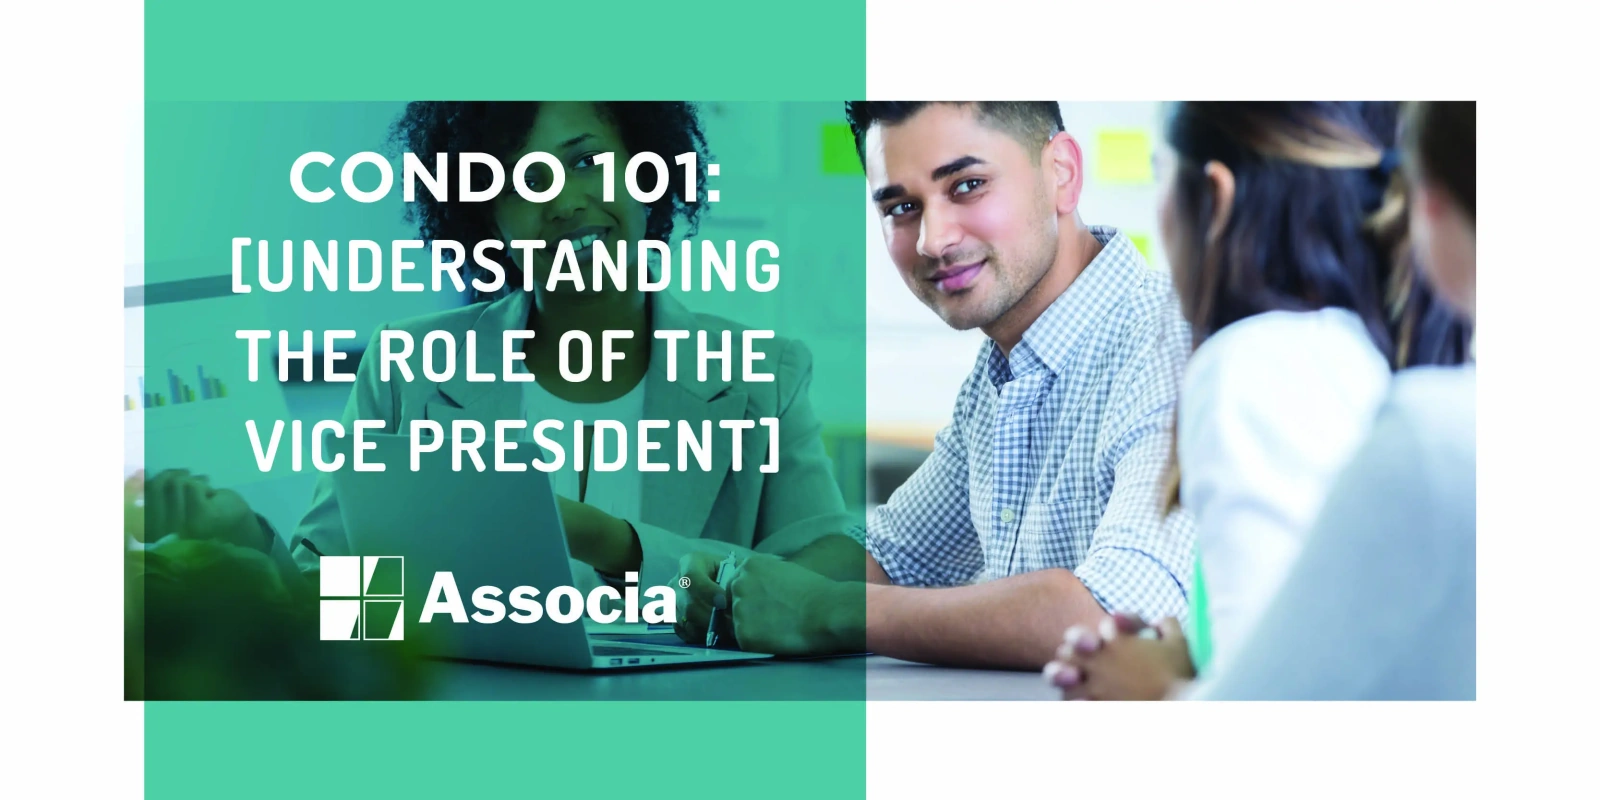 Condo 101: Understanding the Role of the Vice President